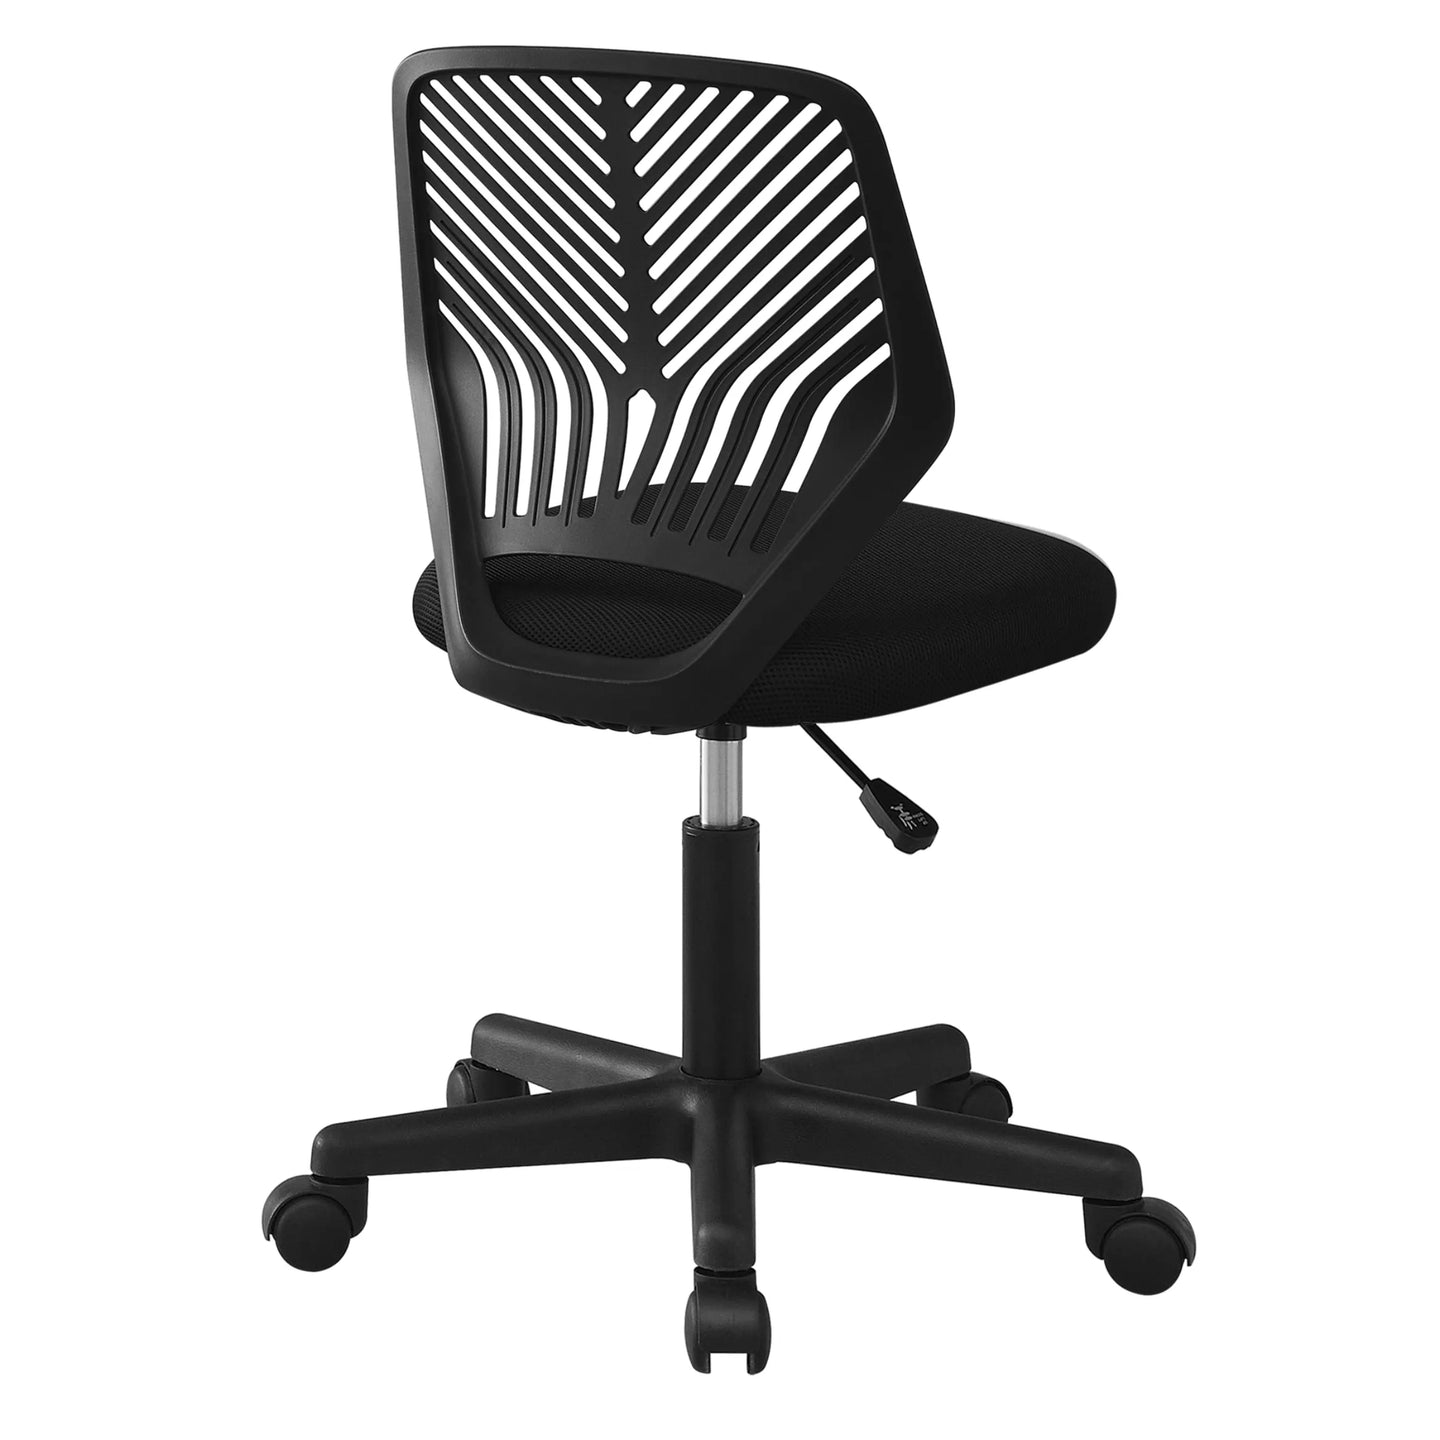 Black Office Chair - I 7336